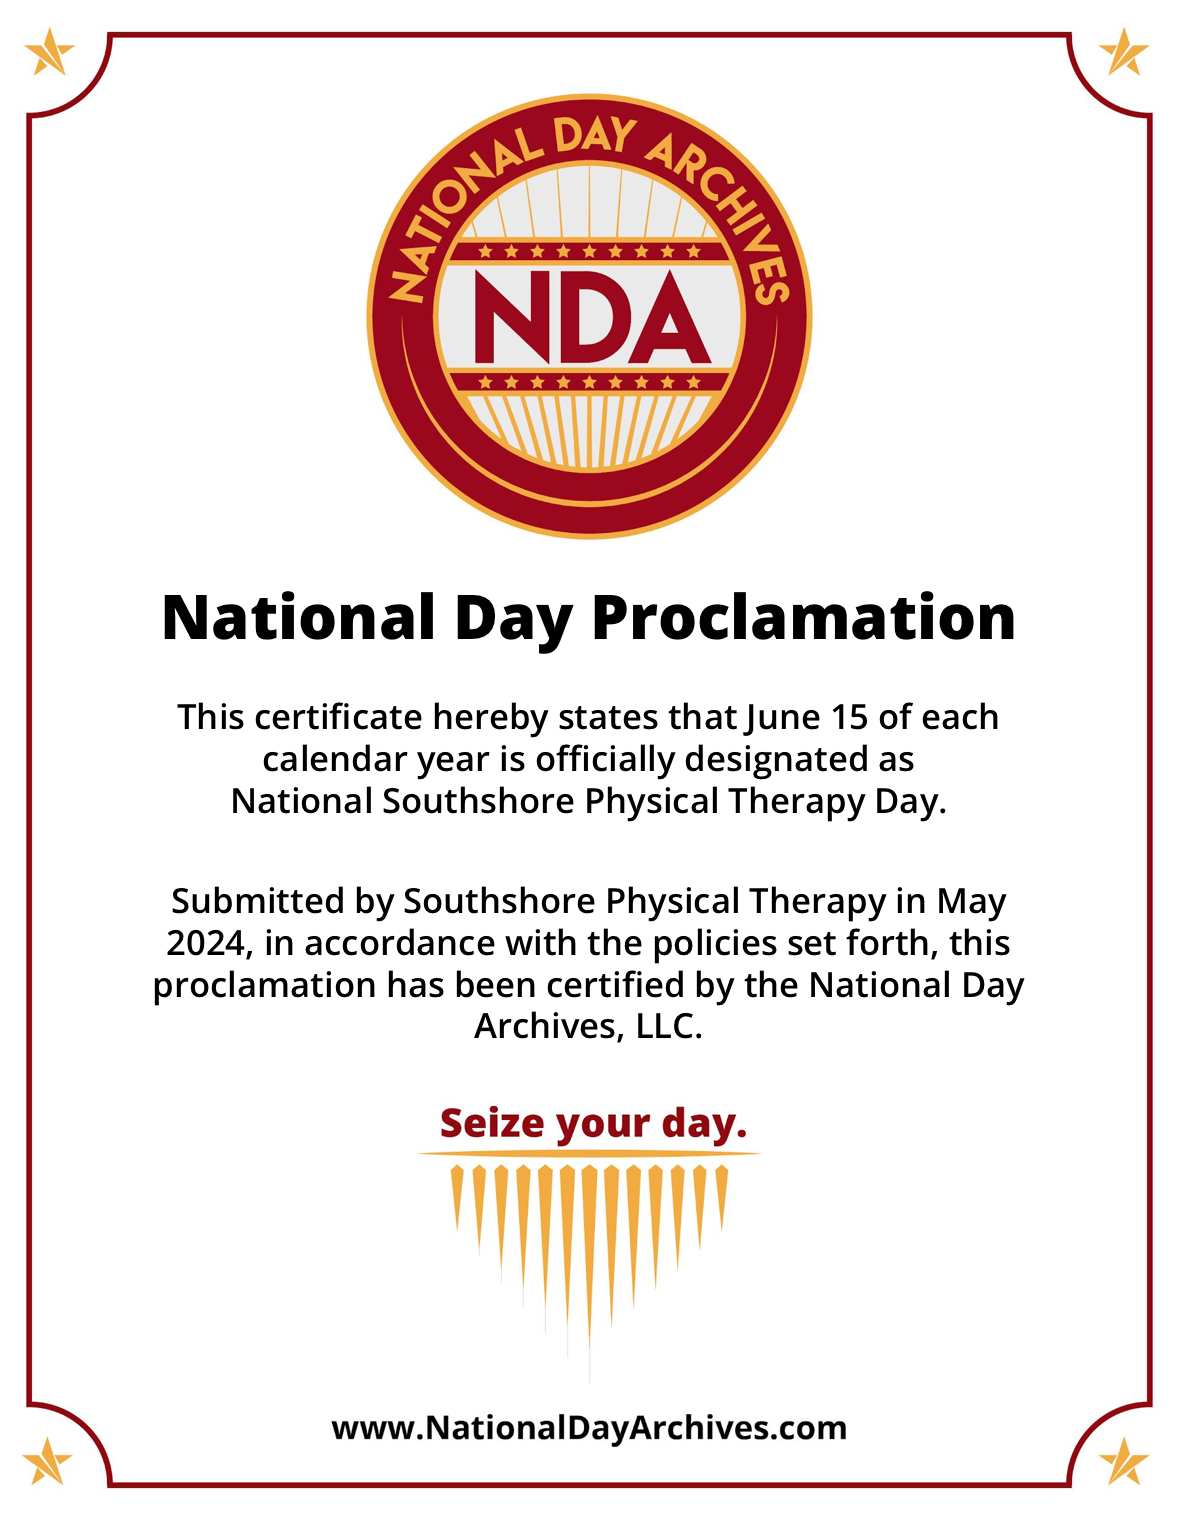 Southshore Physical Therapy, Metairie Louisiana, happy national southshore physical therapy day